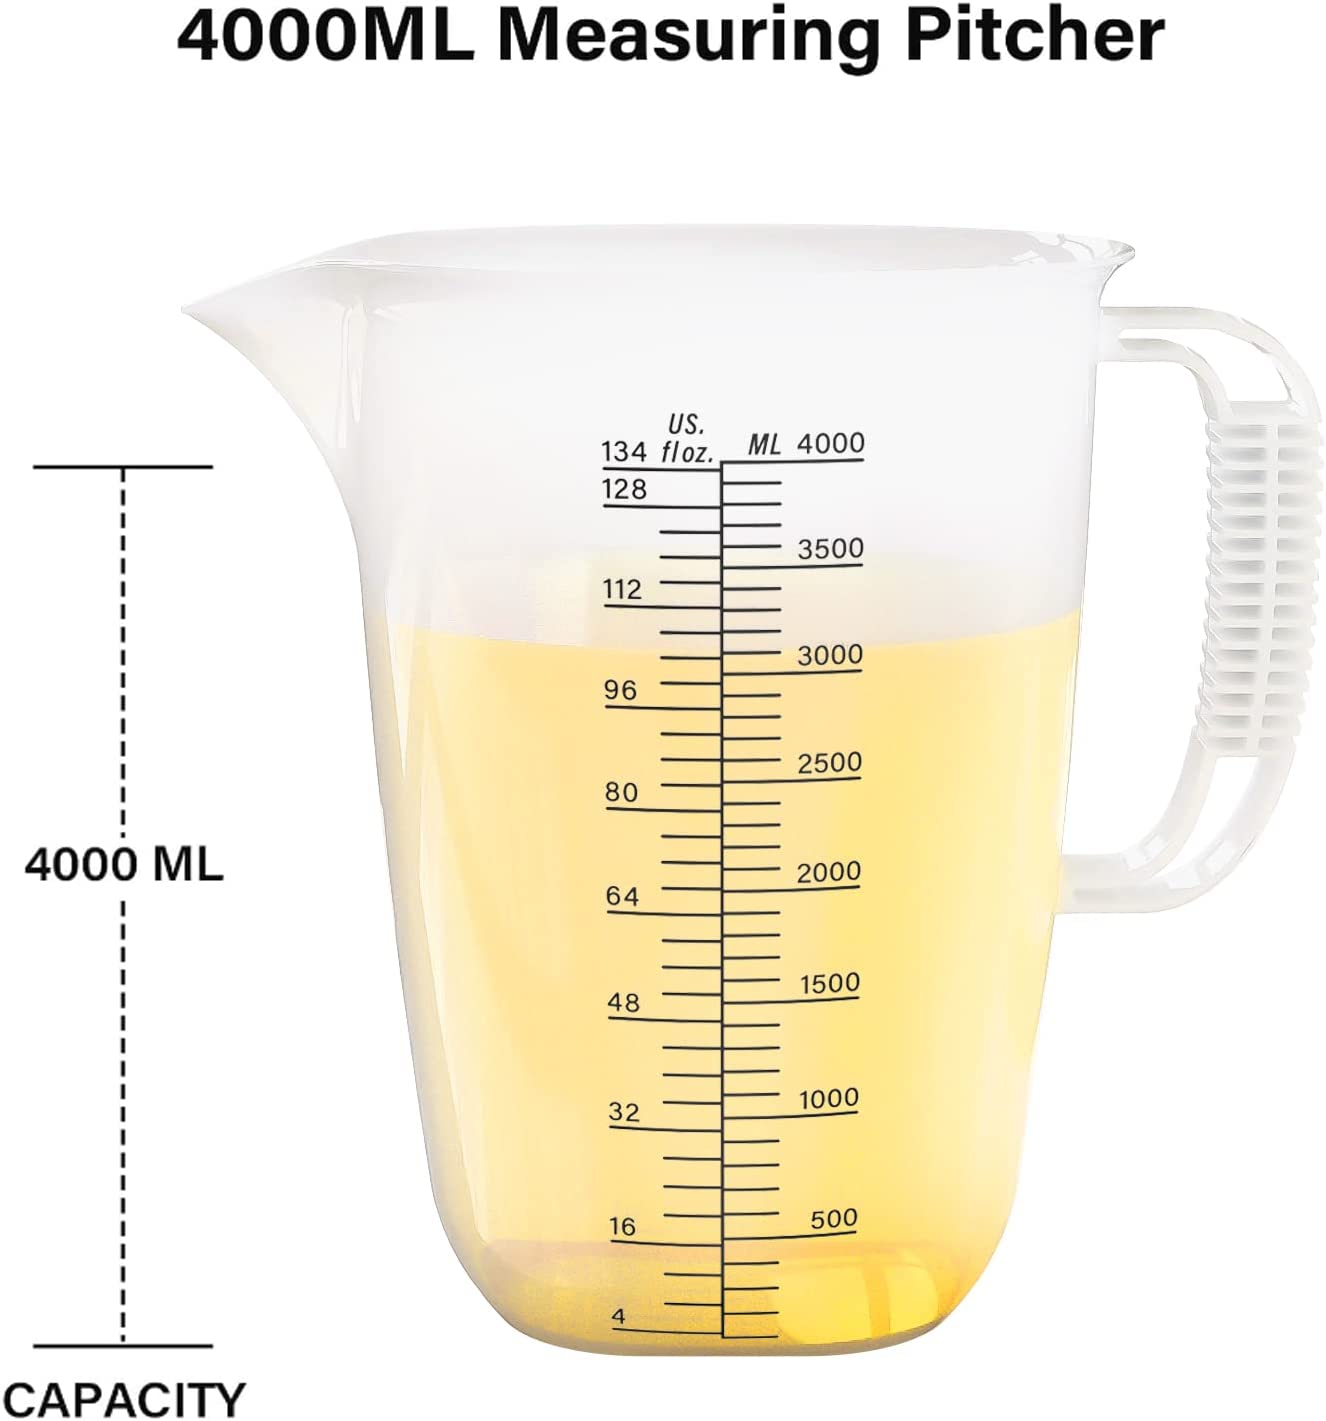 Luvan 50oz/6 Cups Glass Measuring Cup, Easy to Read with 3